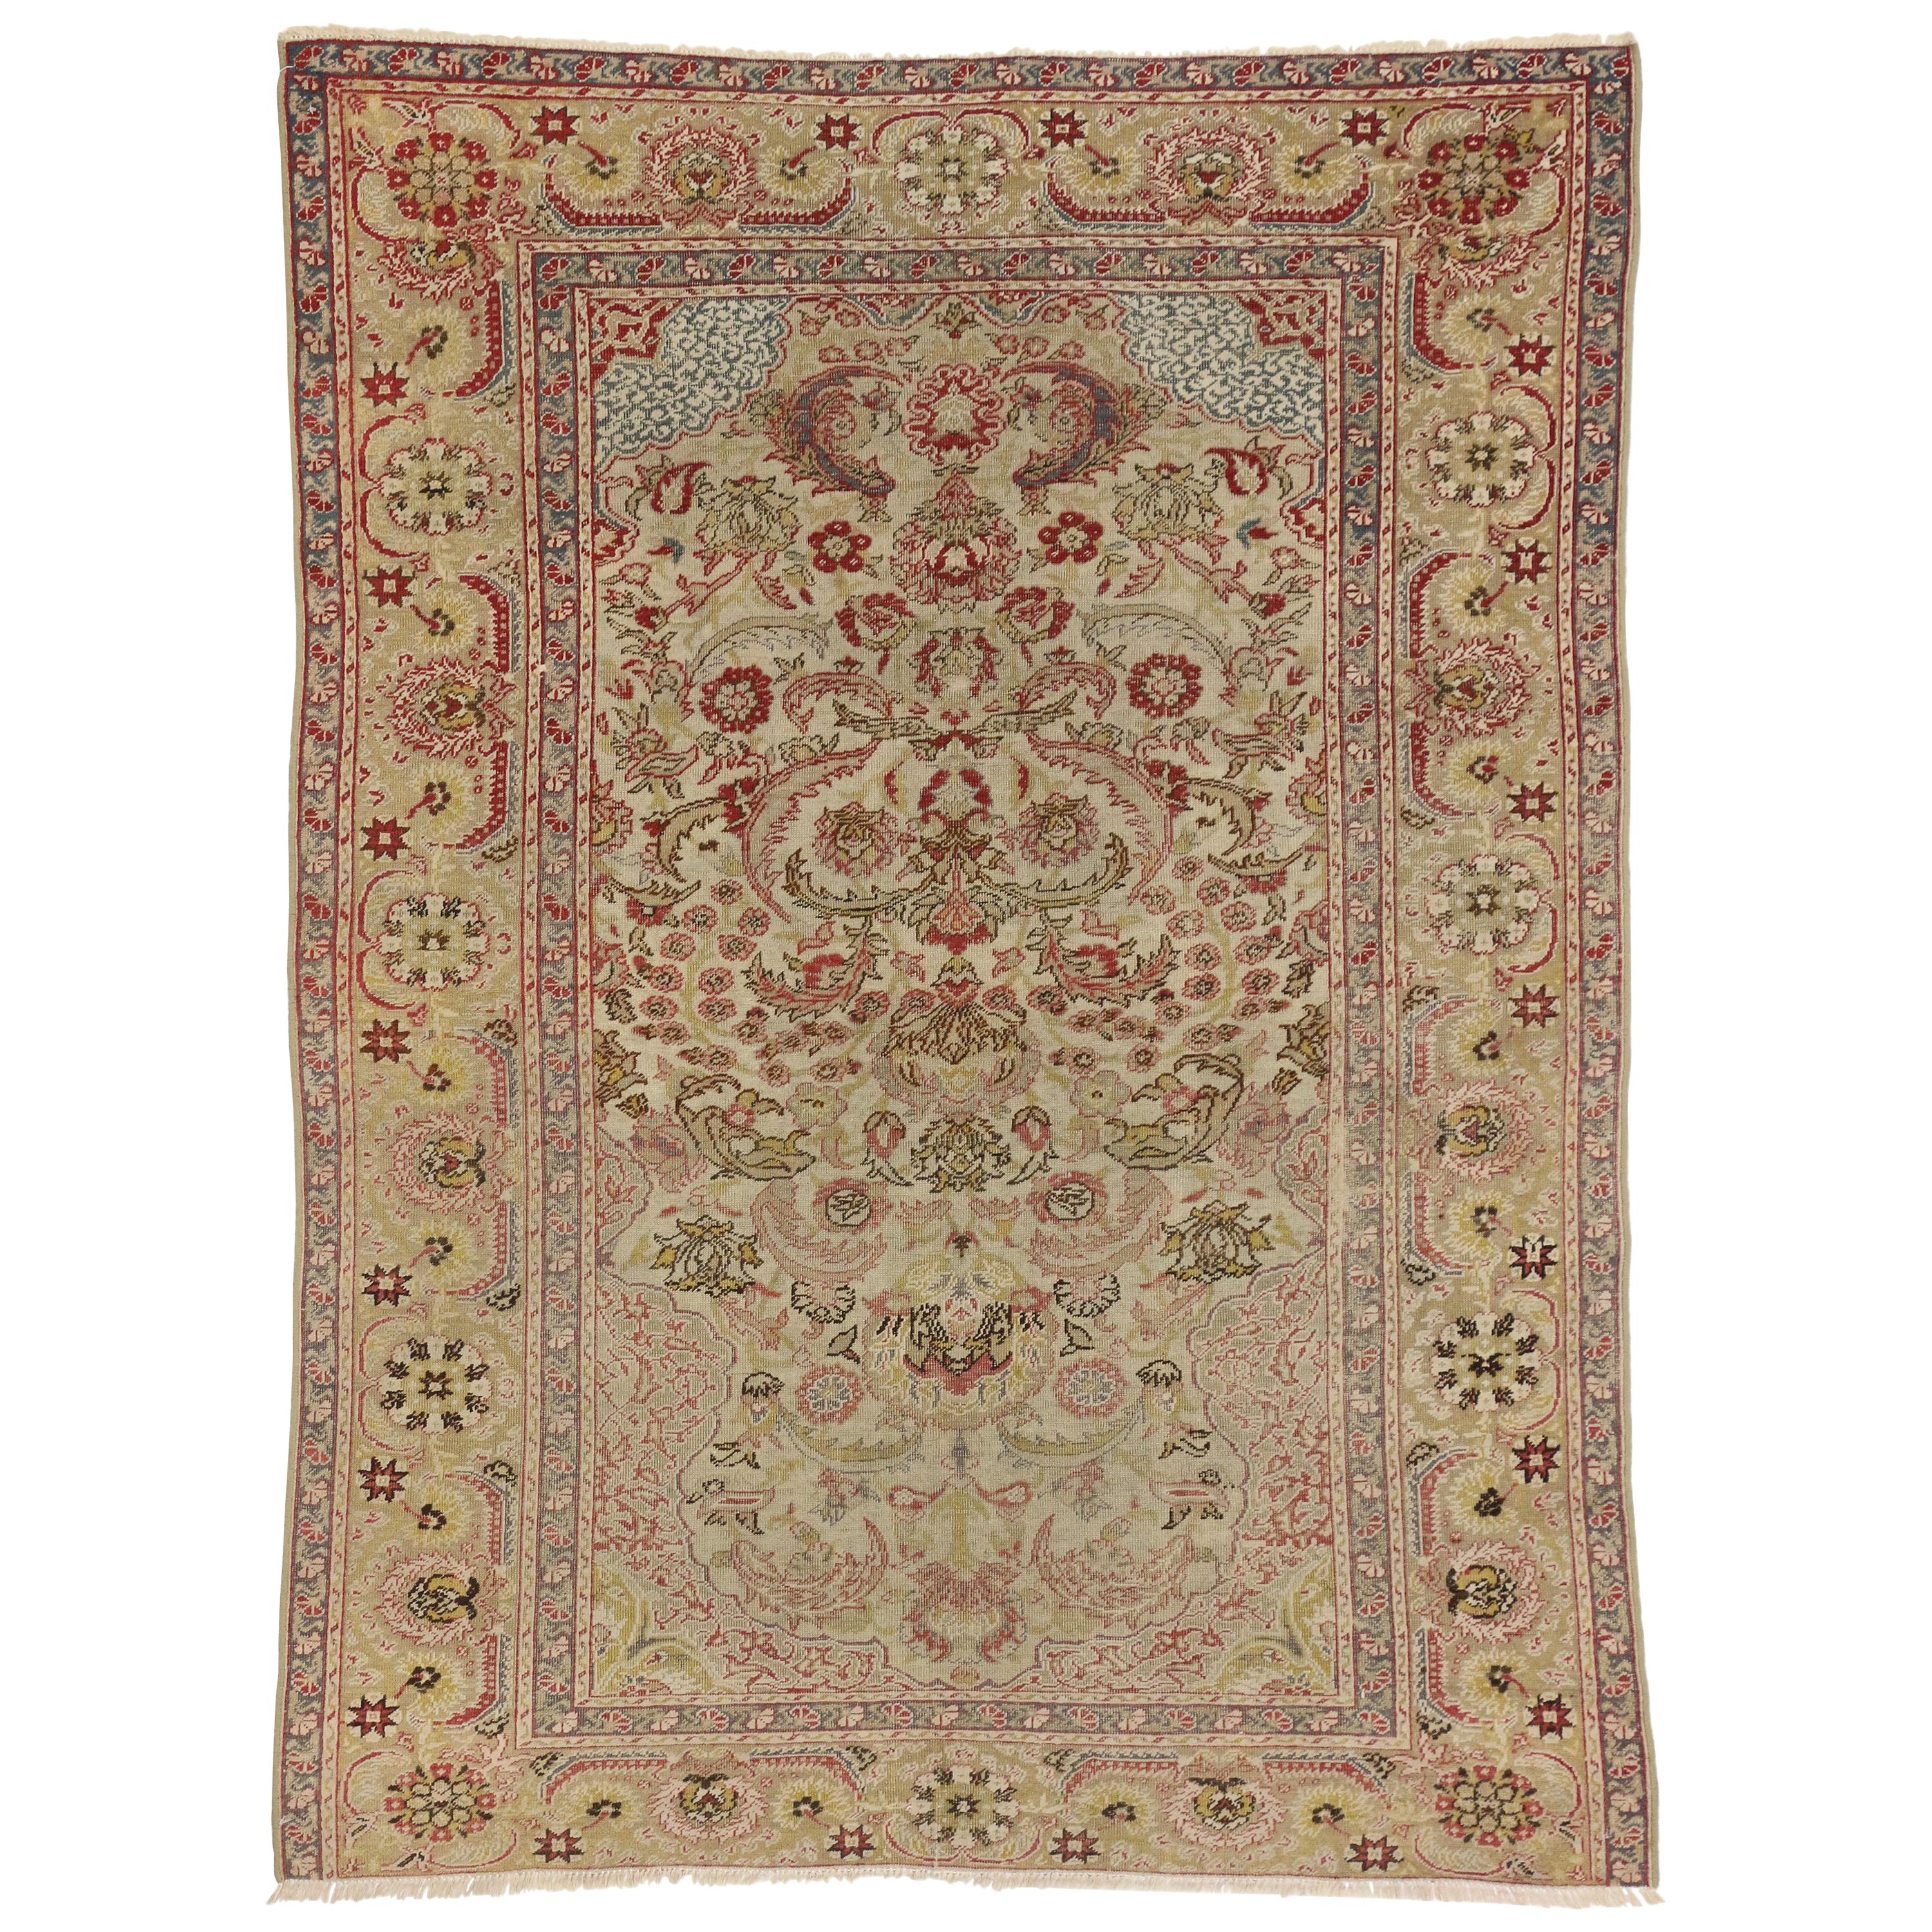 Distressed Antique Turkish Hereke Rug with Rustic English Country Cottage Style